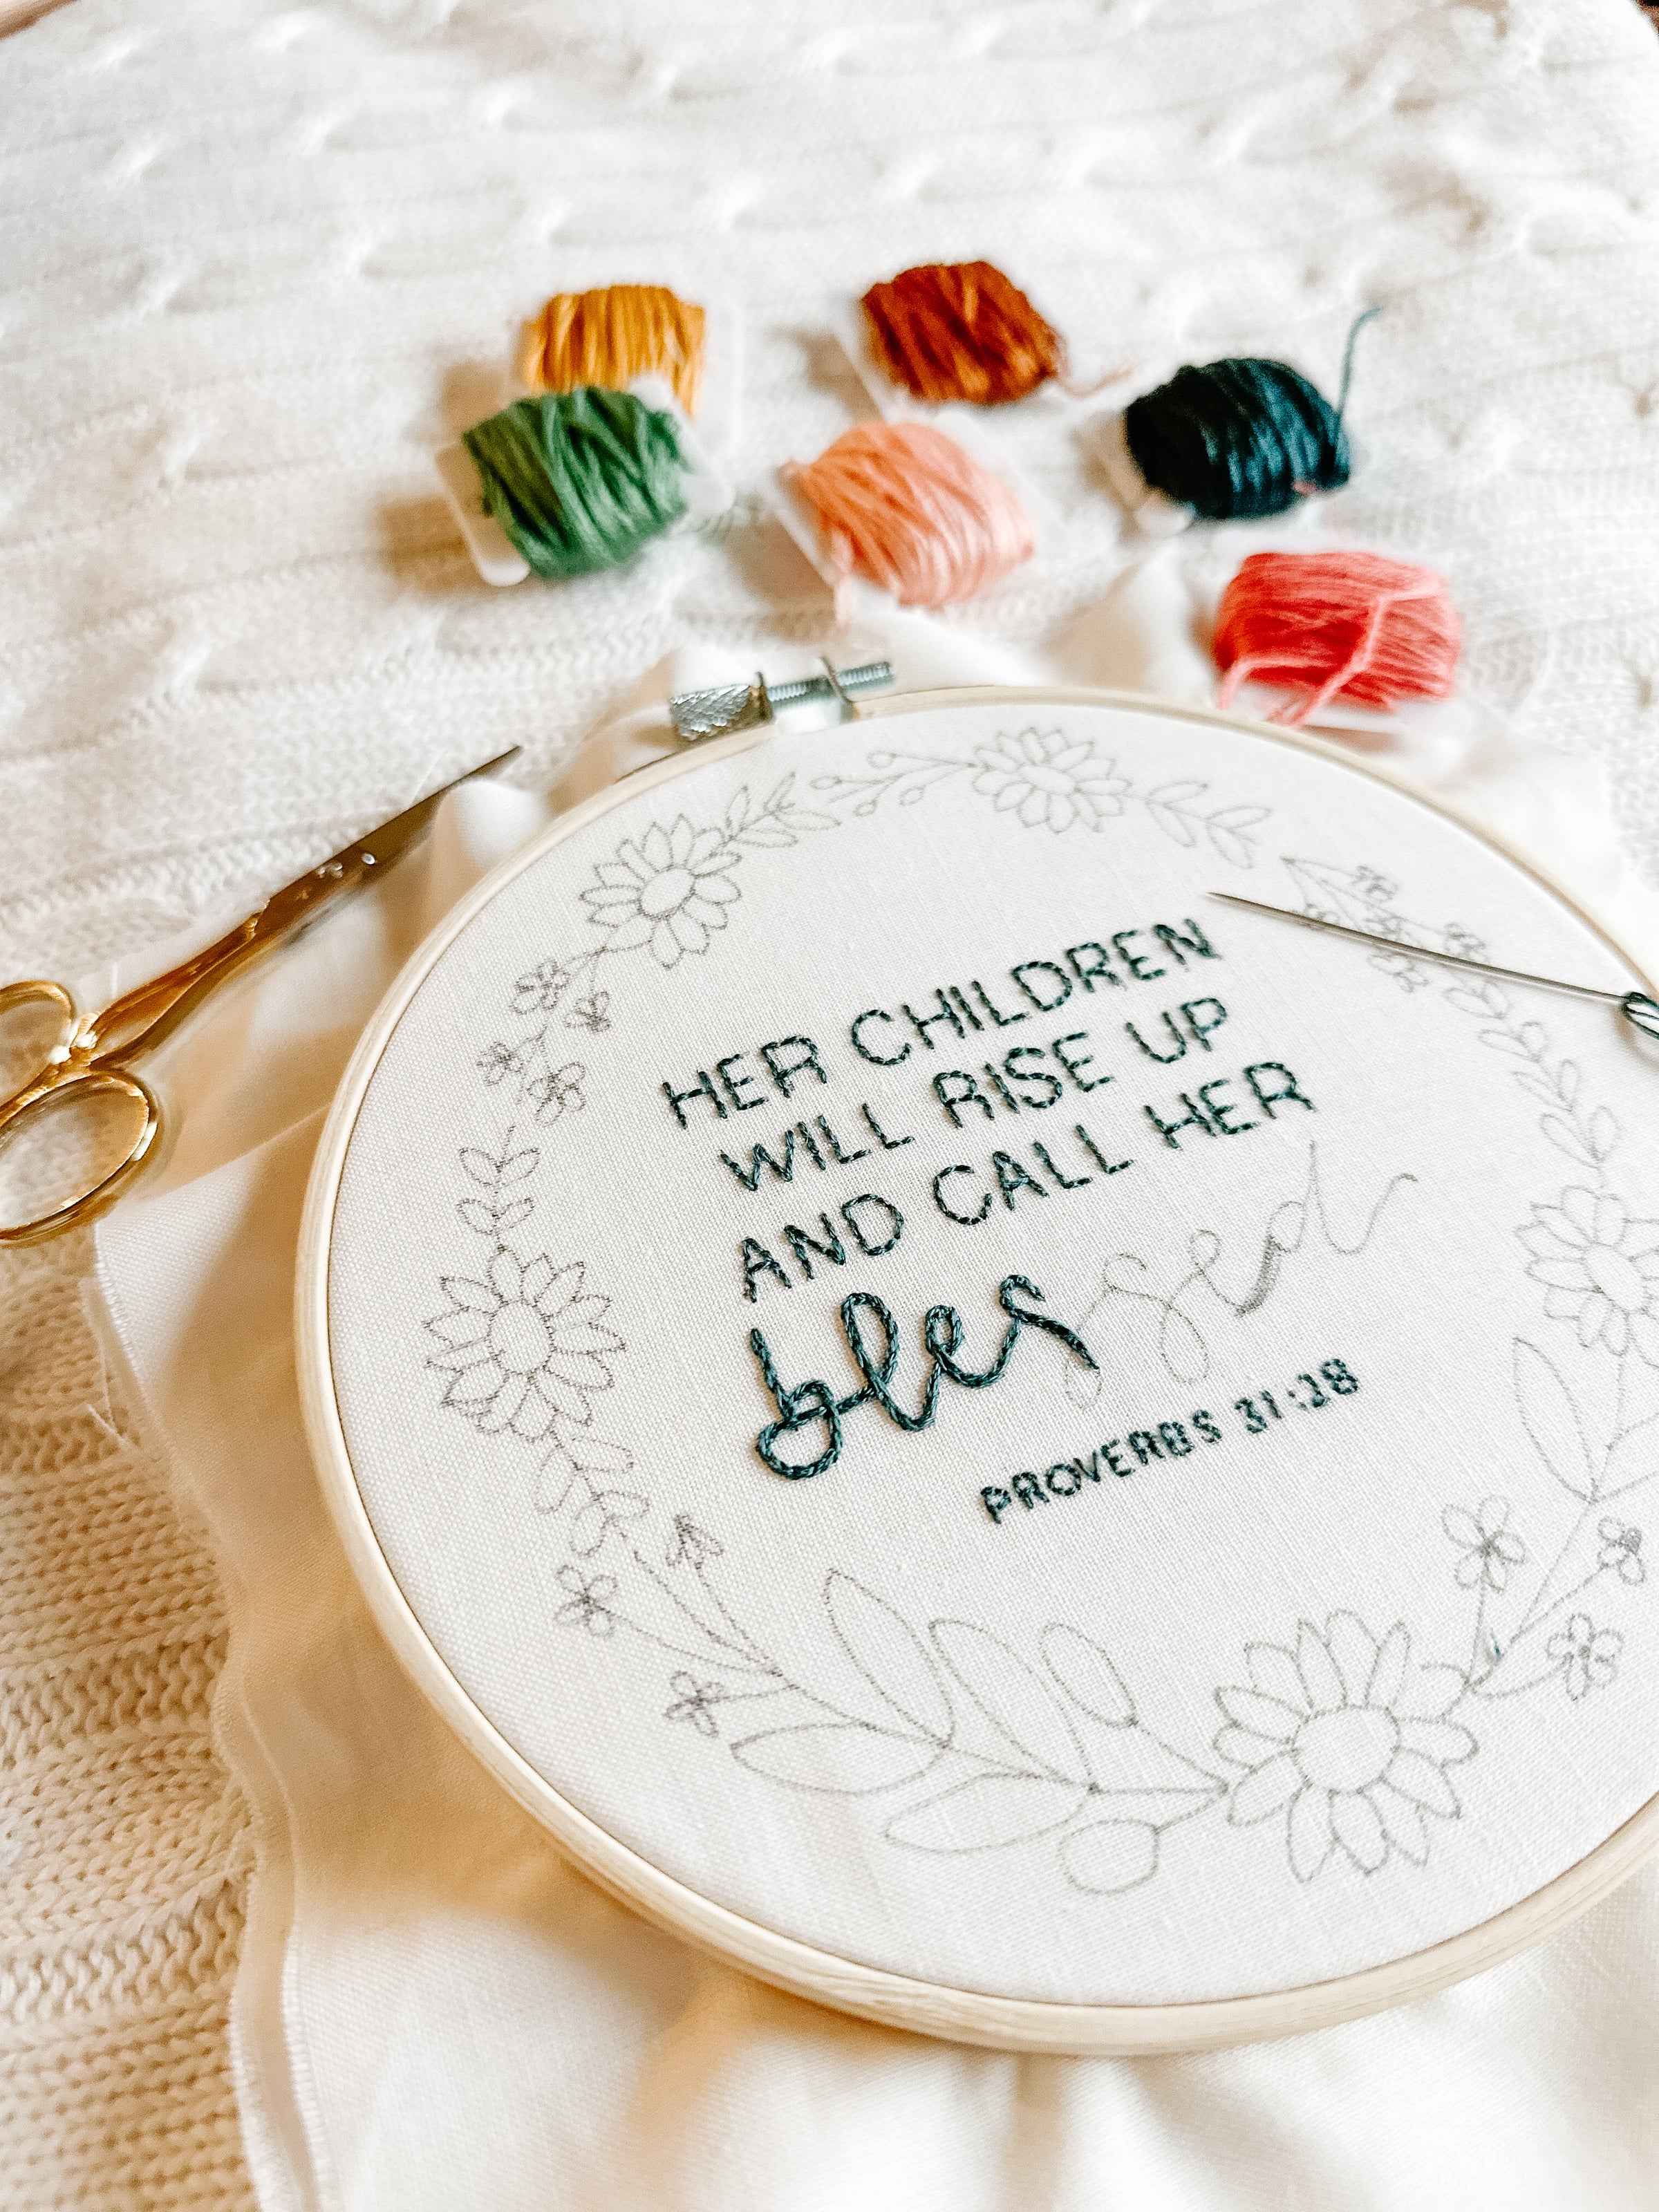 Consider the Wildflowers Embroidery Kit